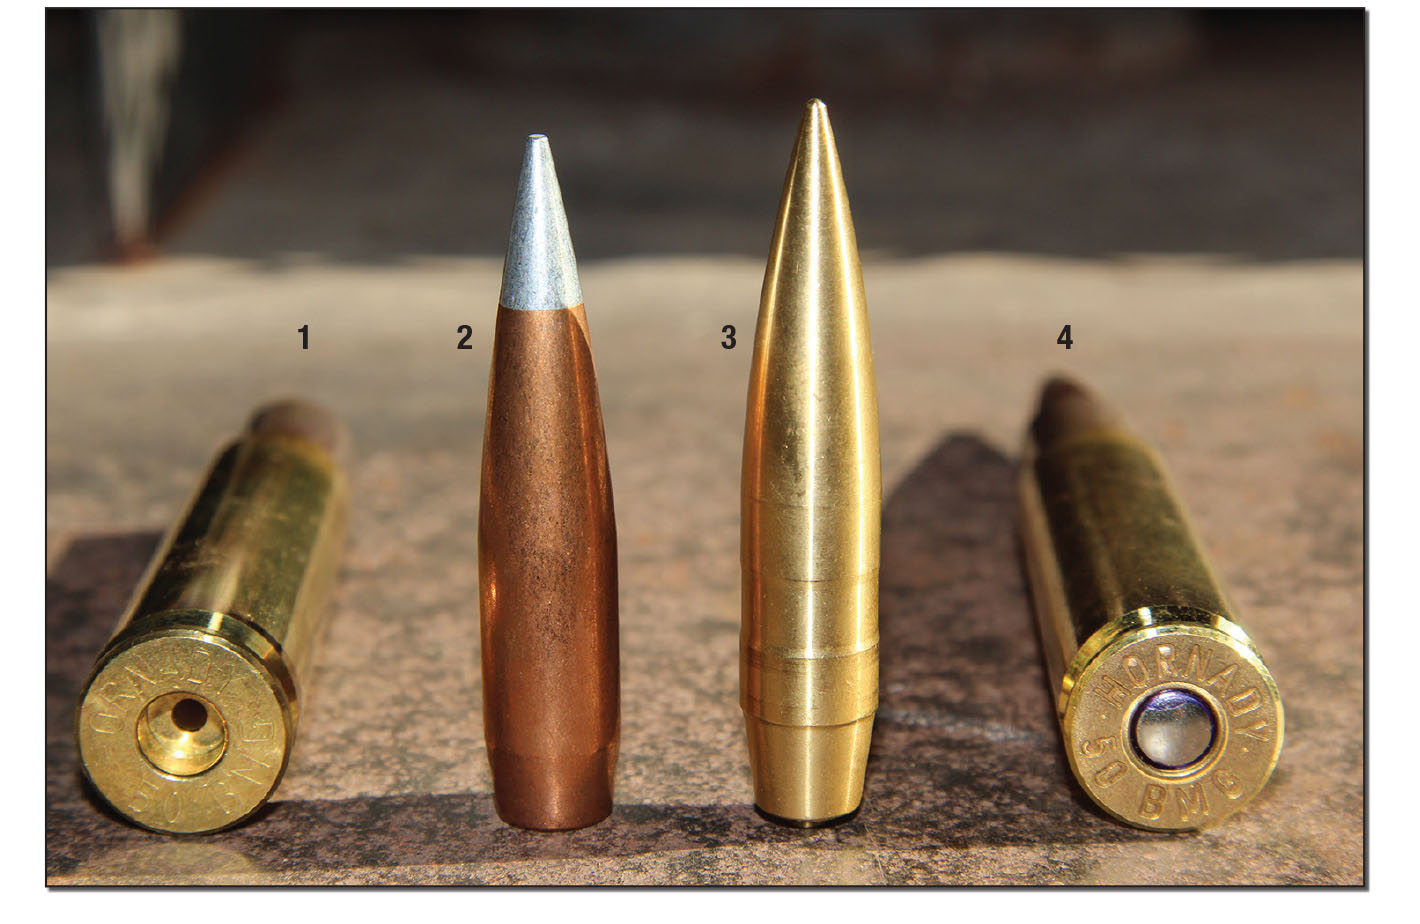 Brass, bullets and ammunition used for testing included the: (1) Hornady Match brass (used for handloads), (2) Hornady’s 750-grain A-MAX, (3) Lapua’s 800-grain Bullex-N and (4) Hornady 750-grain A-MAX ammunition.